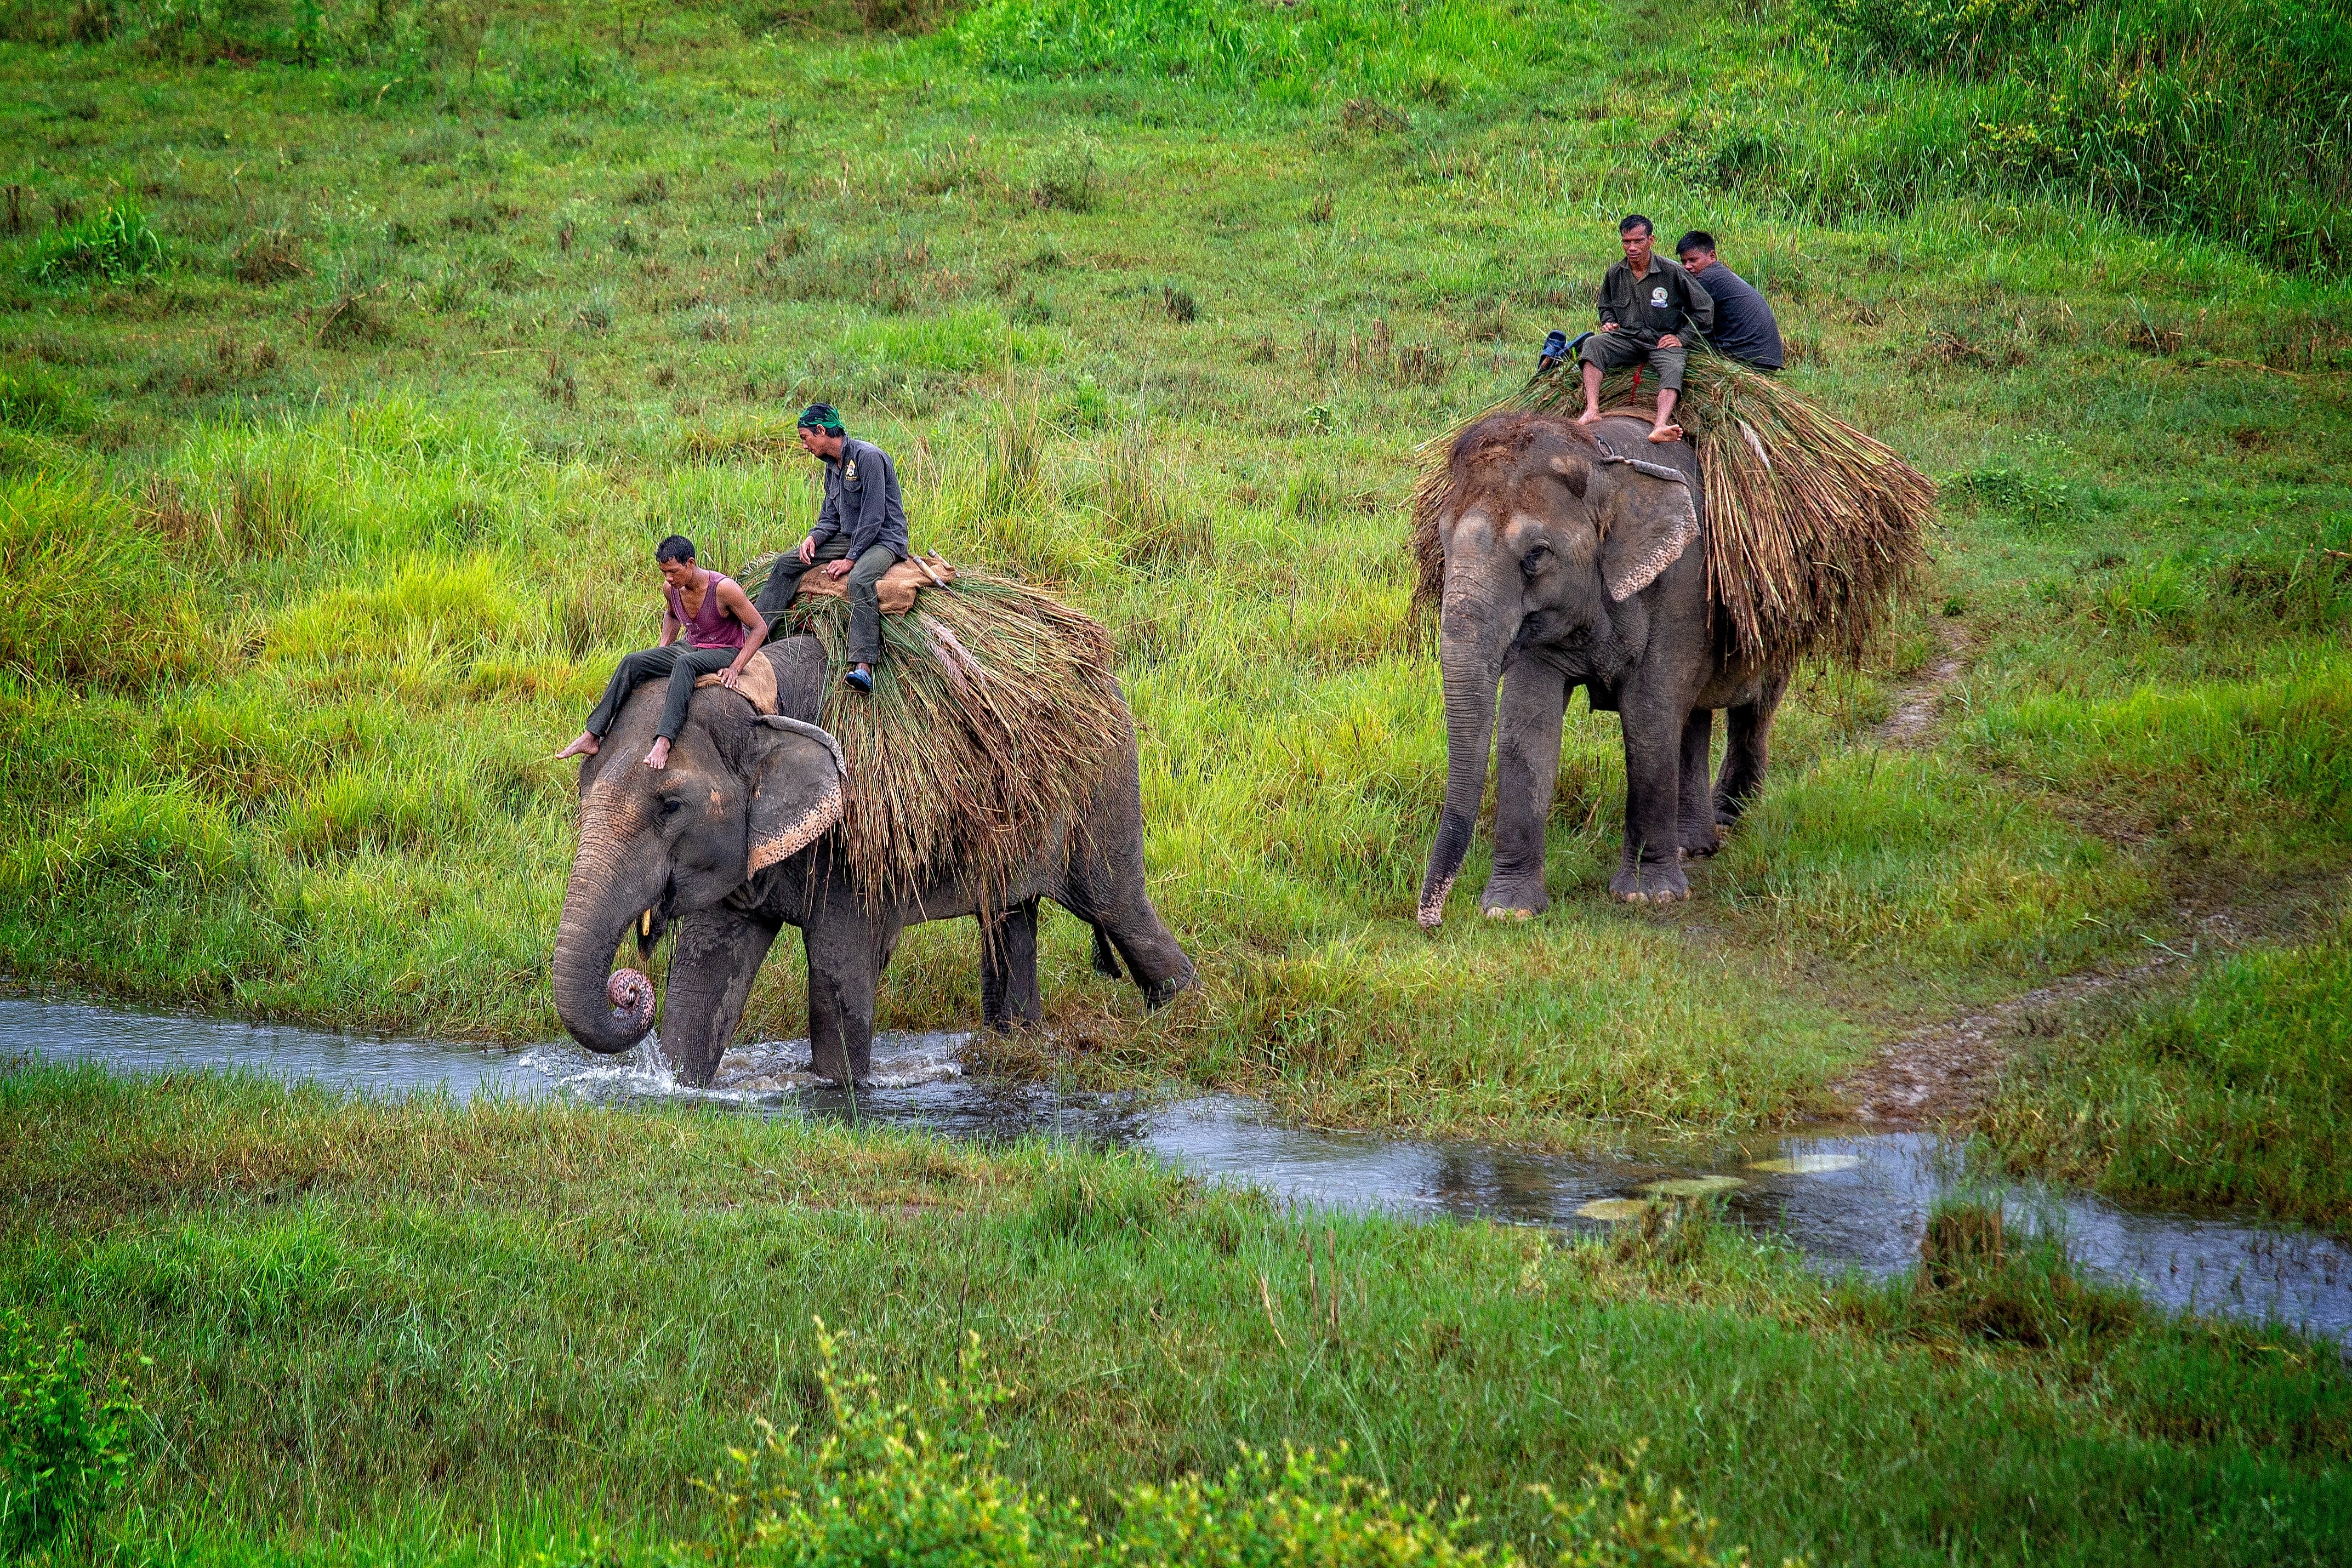 In Chitwan with various Jungle activities and elephant safari.'